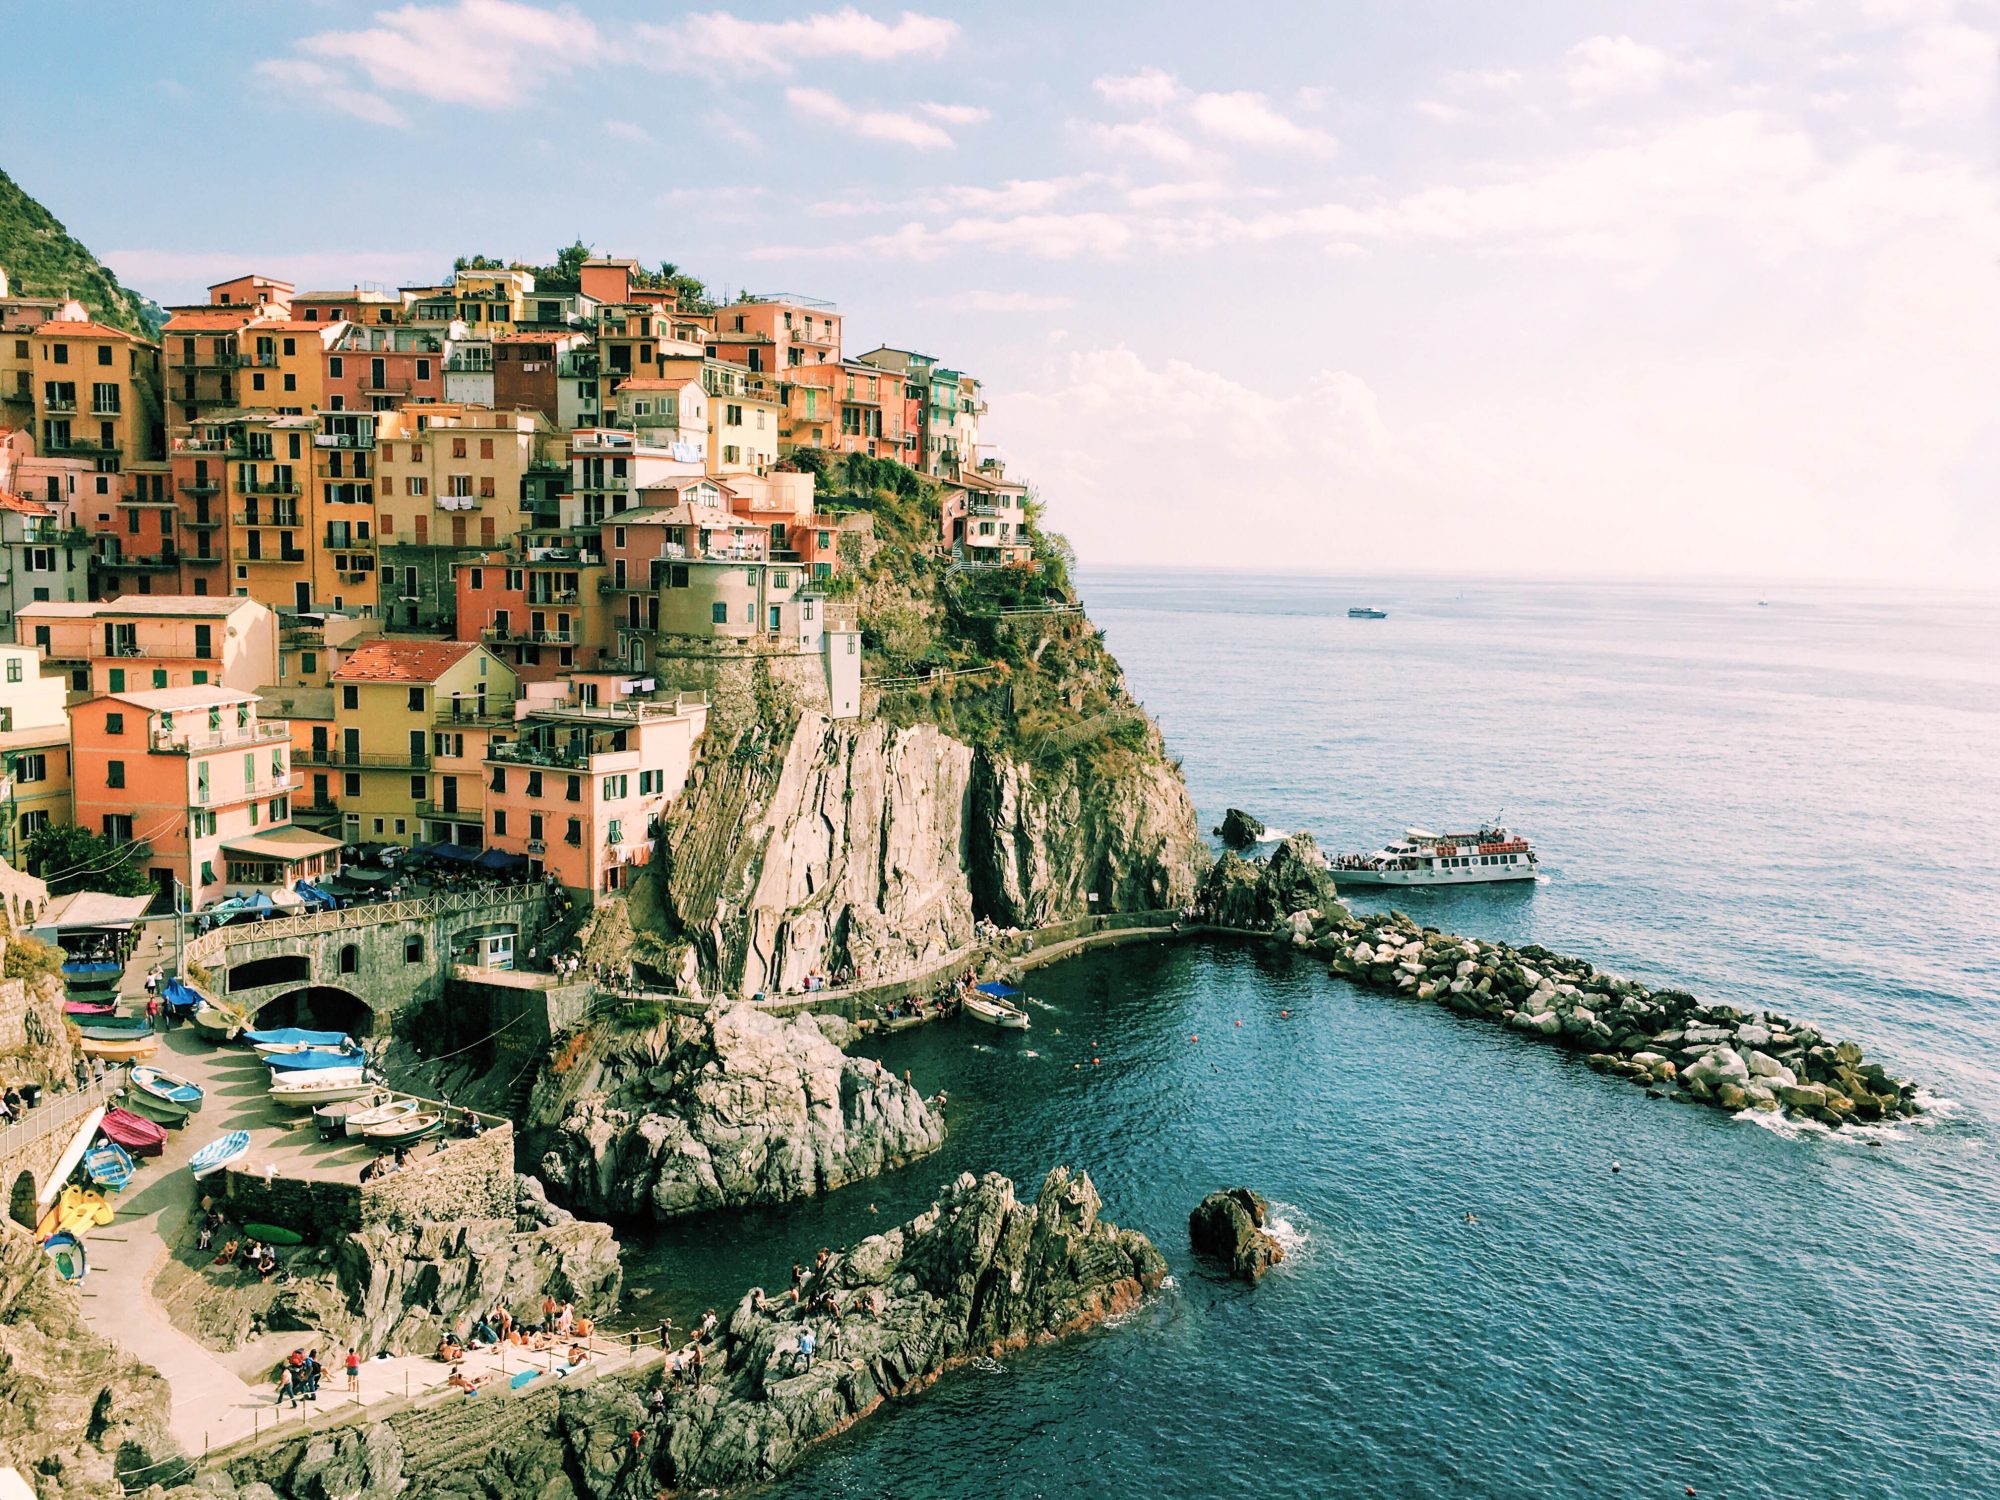 Aerial view of Manarola Italy one of the Cinque Terre towns on SelfishMe Travel LLC